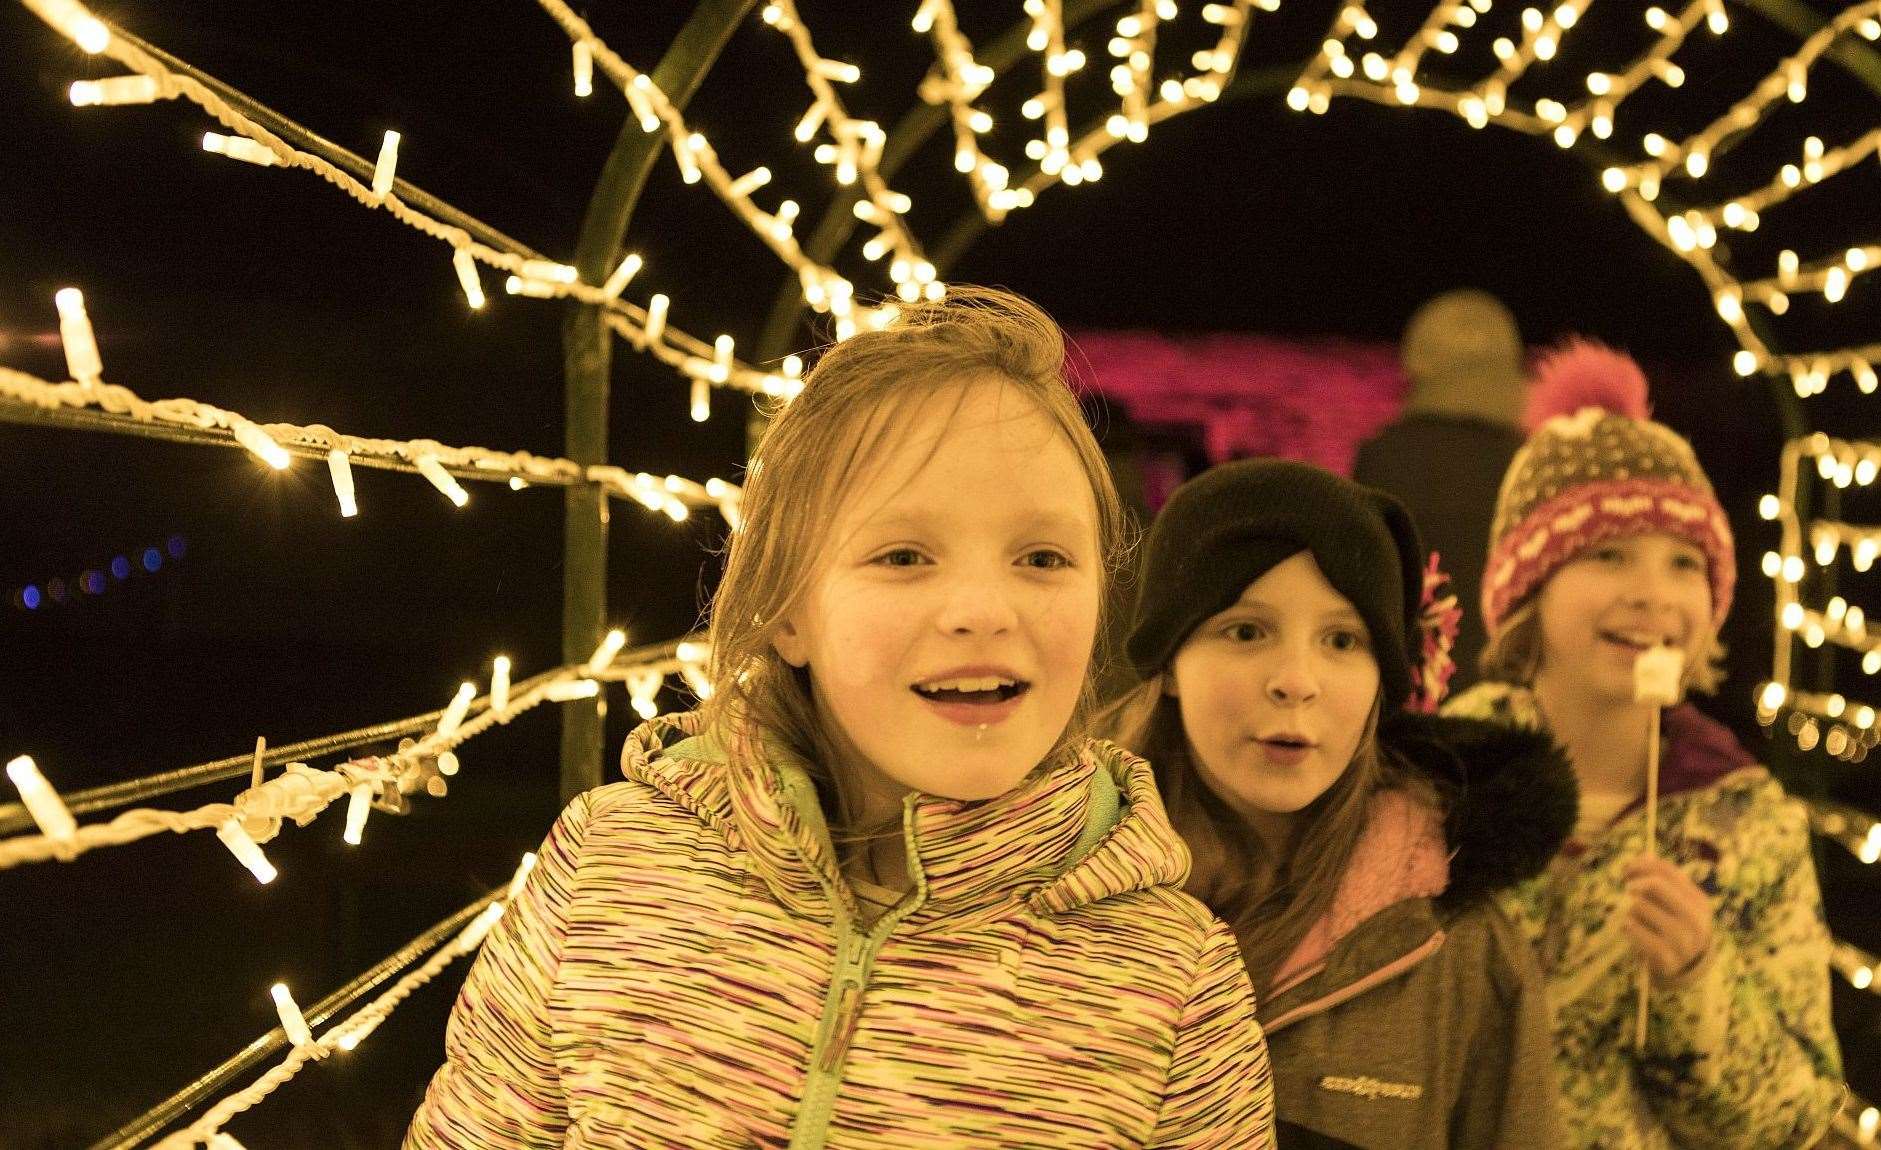 Walmer Castle and Gardens will have a Christmas lights trail